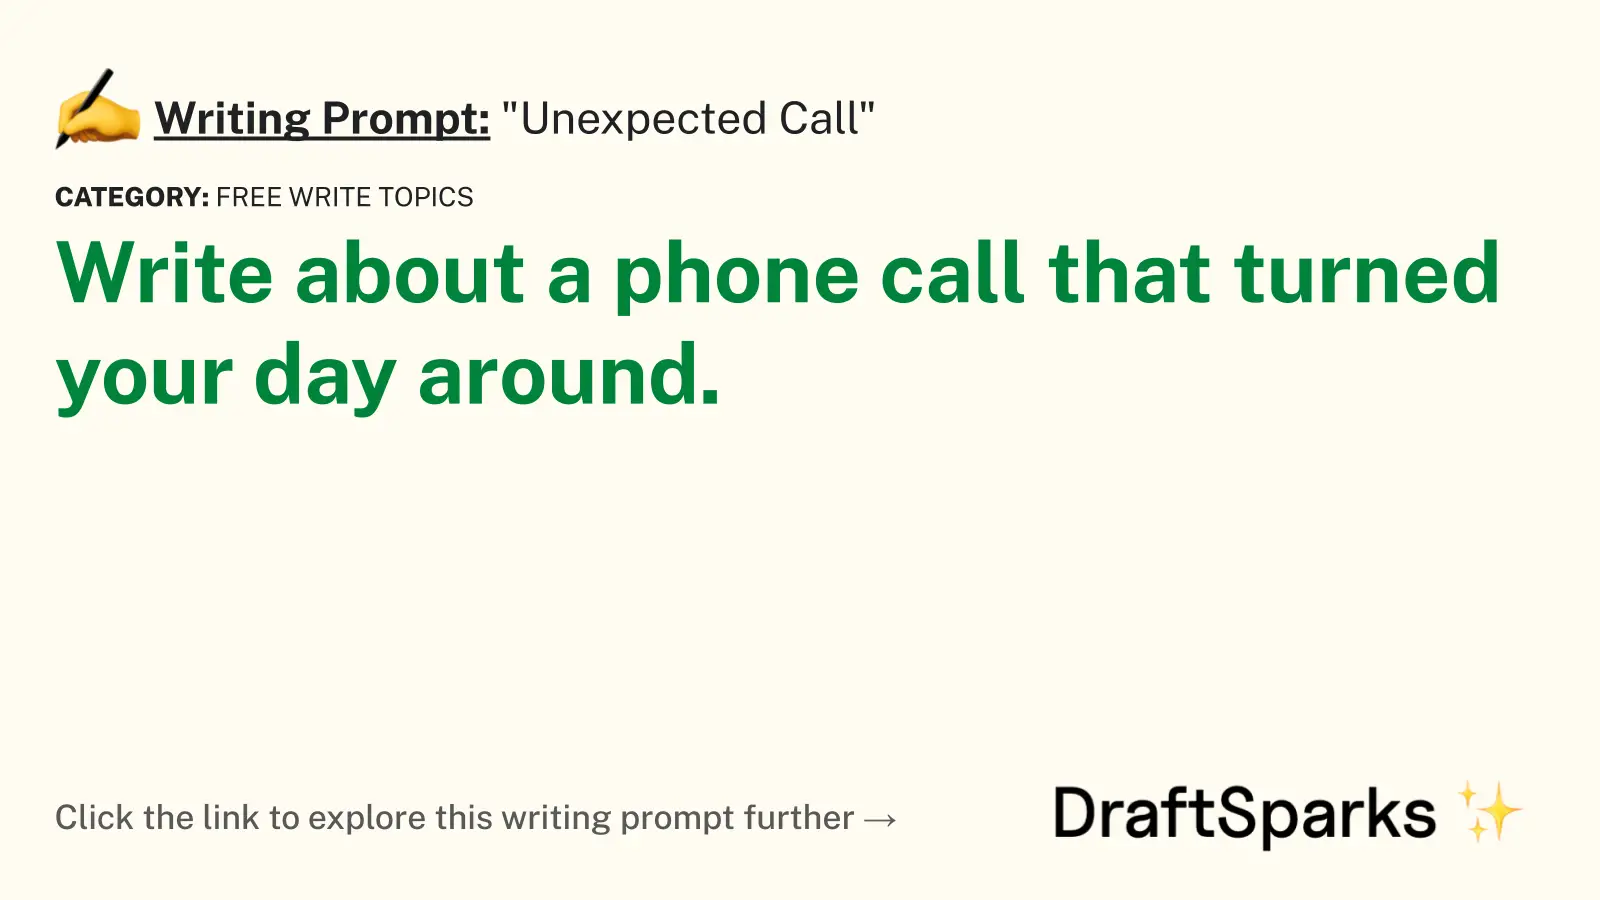 “Unexpected Call”